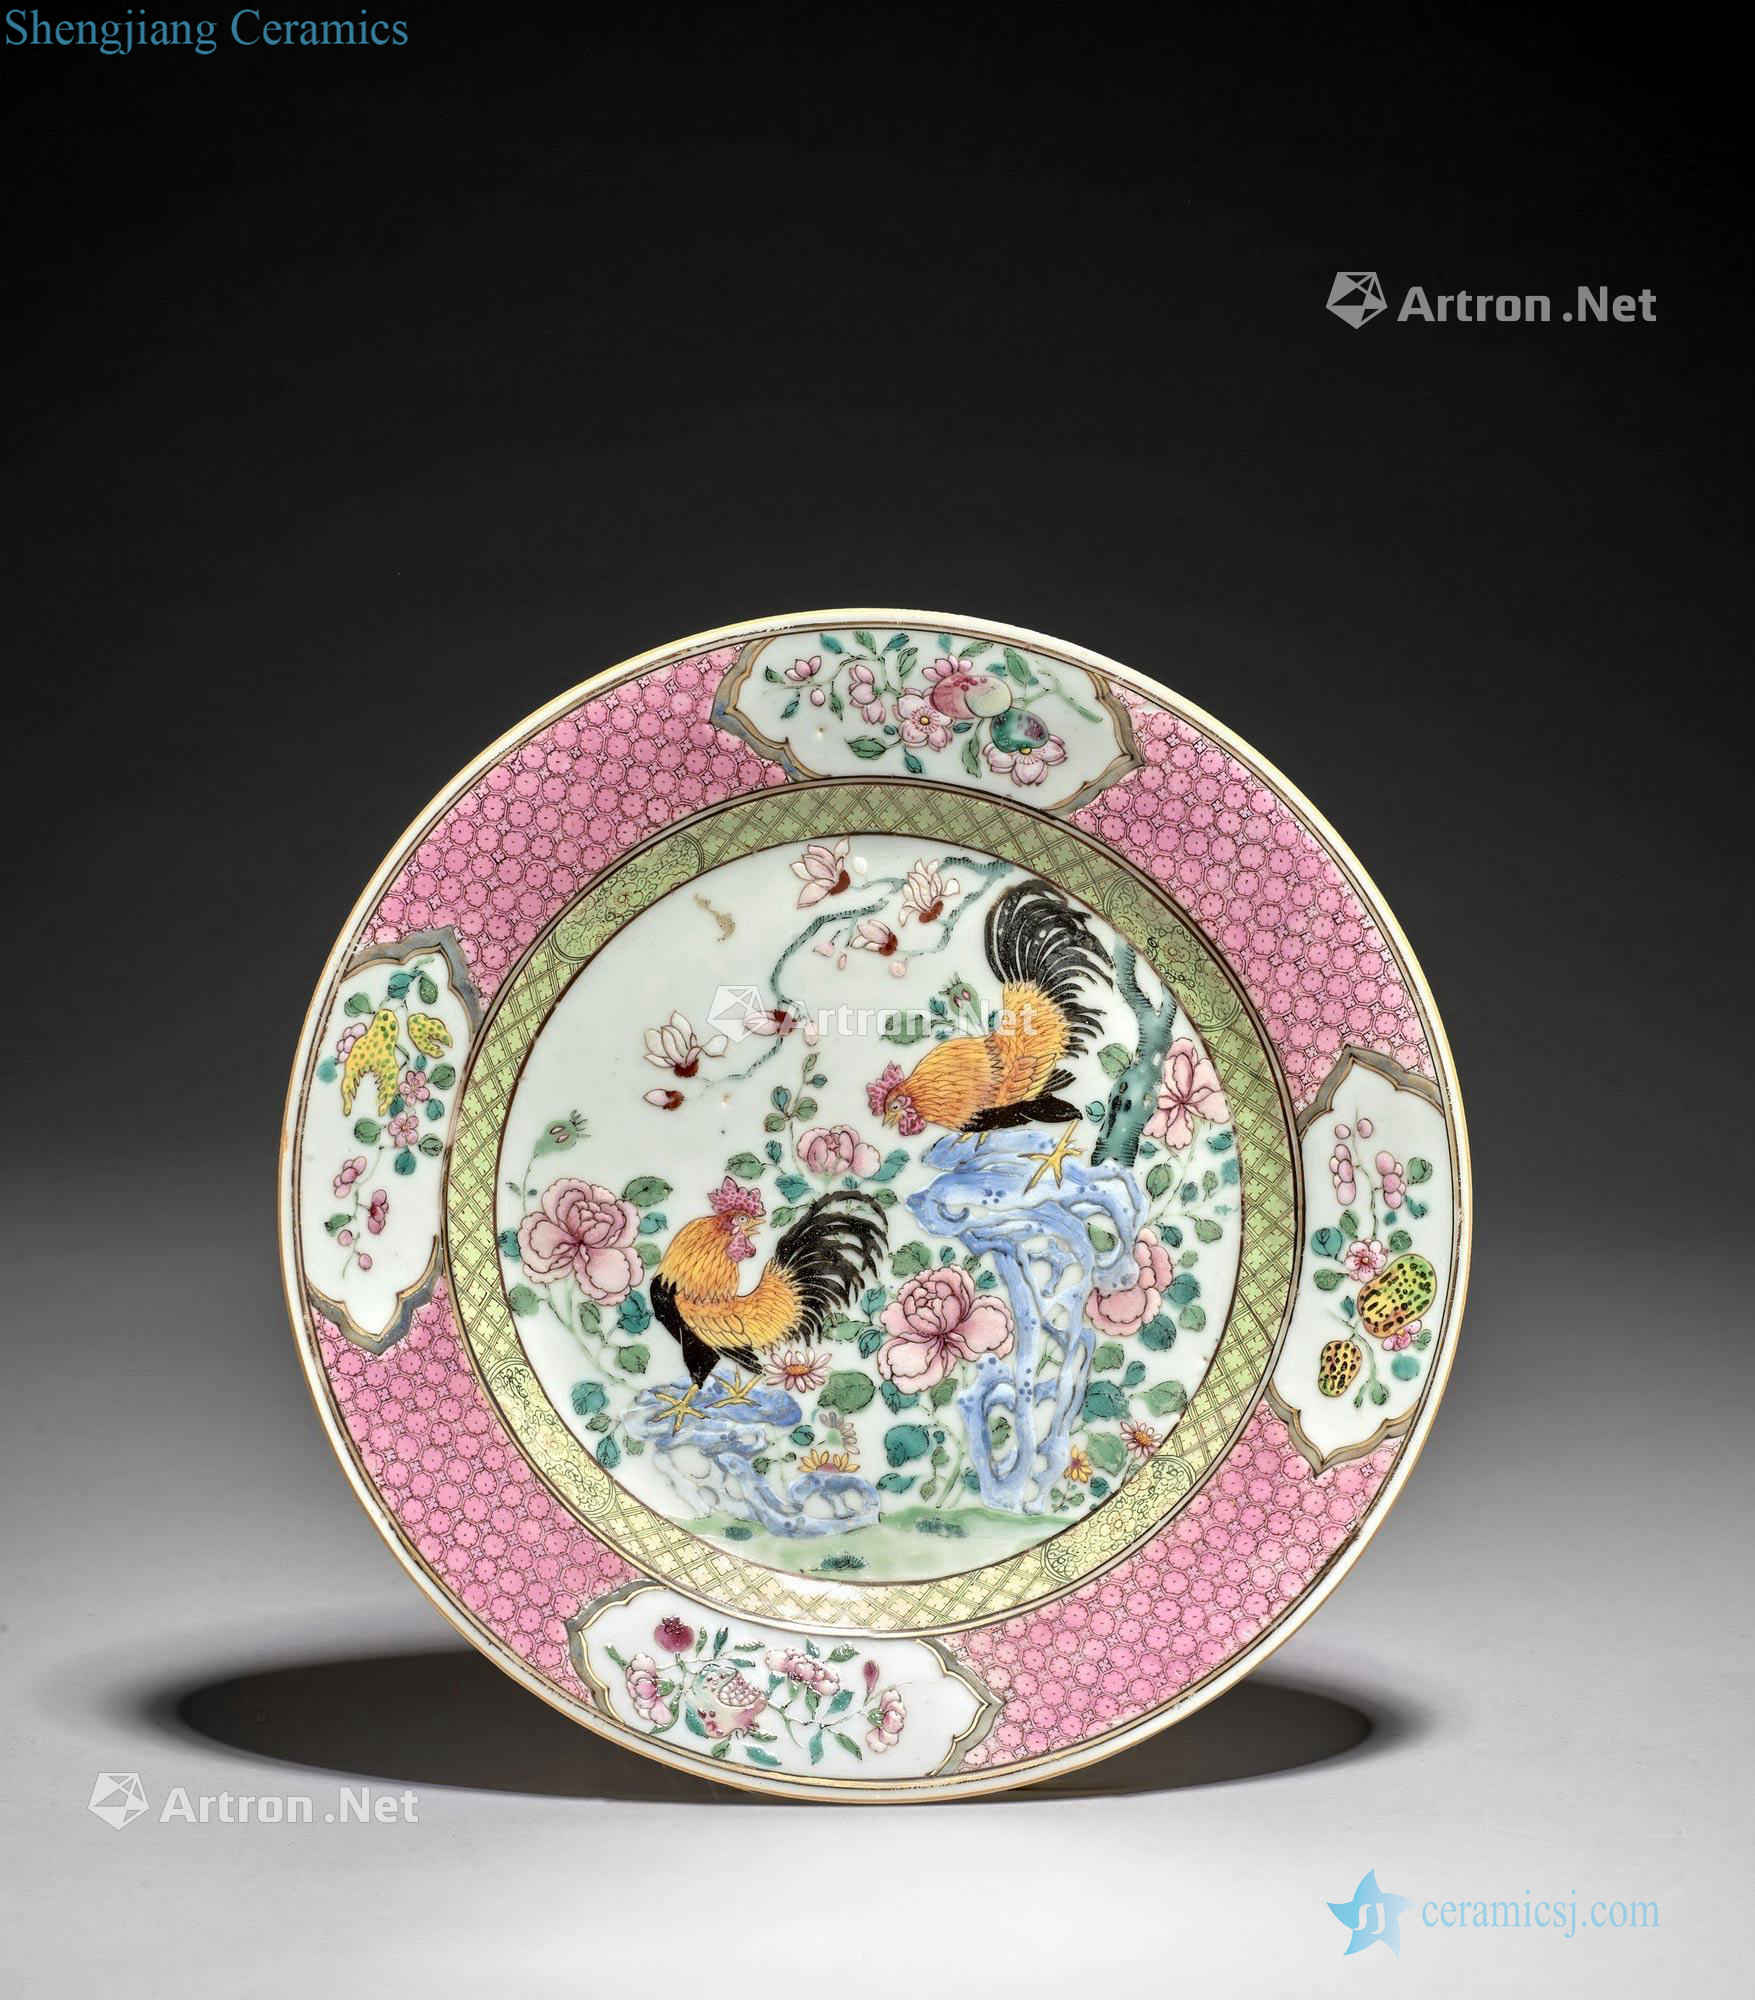 China, the Qing dynasty, 18 th century A famille rose porcelain plate